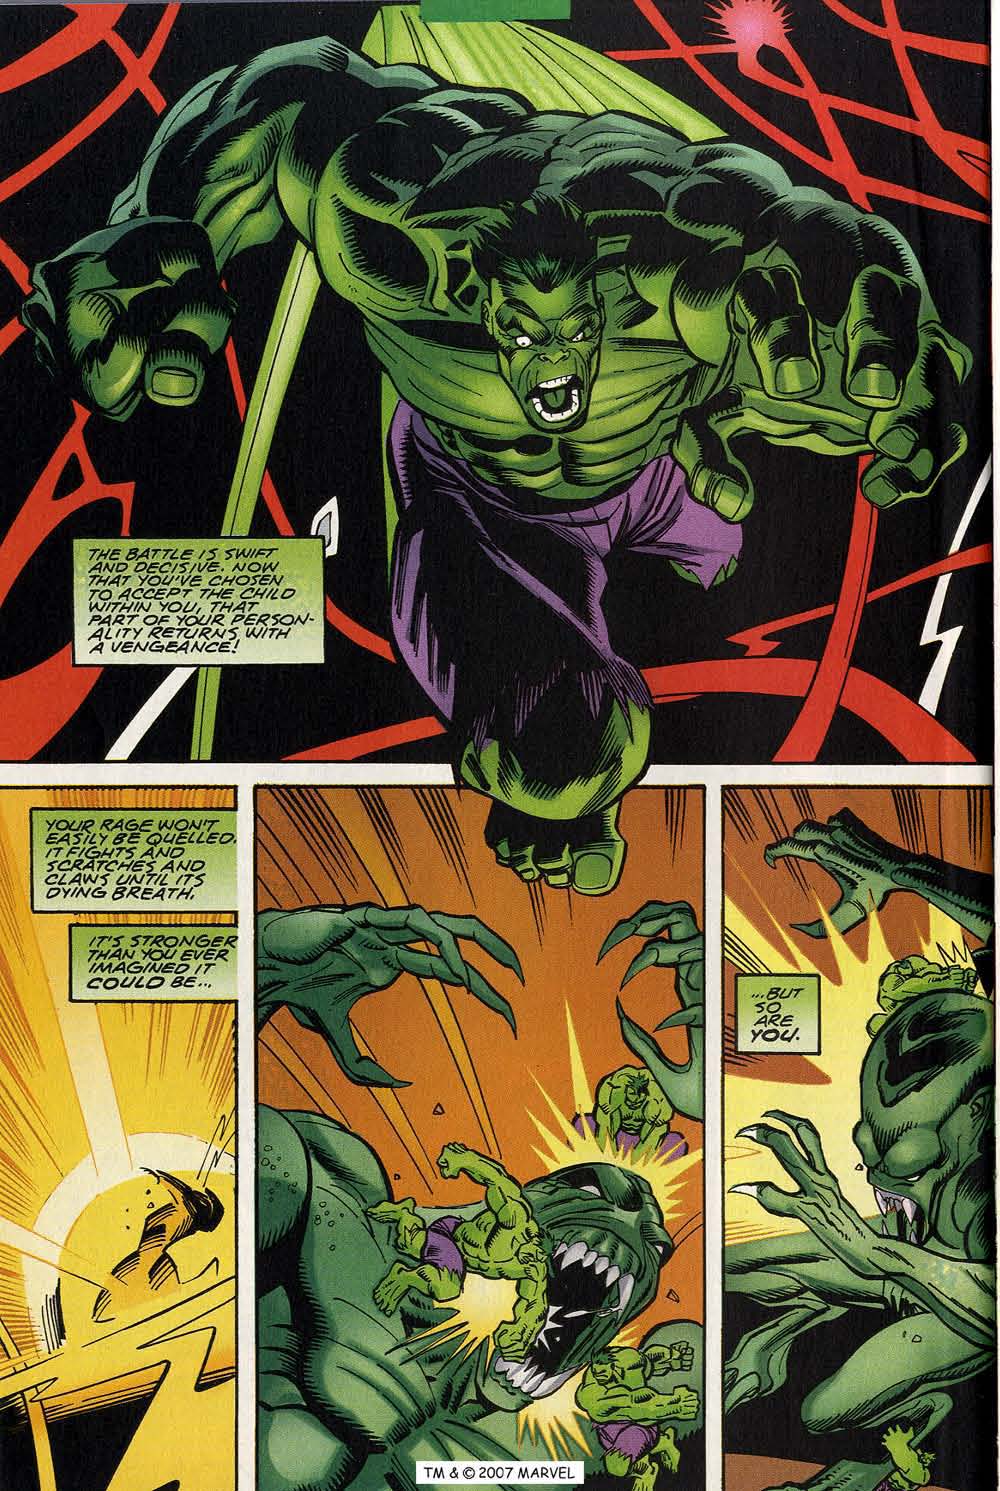 The Incredible Hulk (2000) Issue #13 #2 - English 28